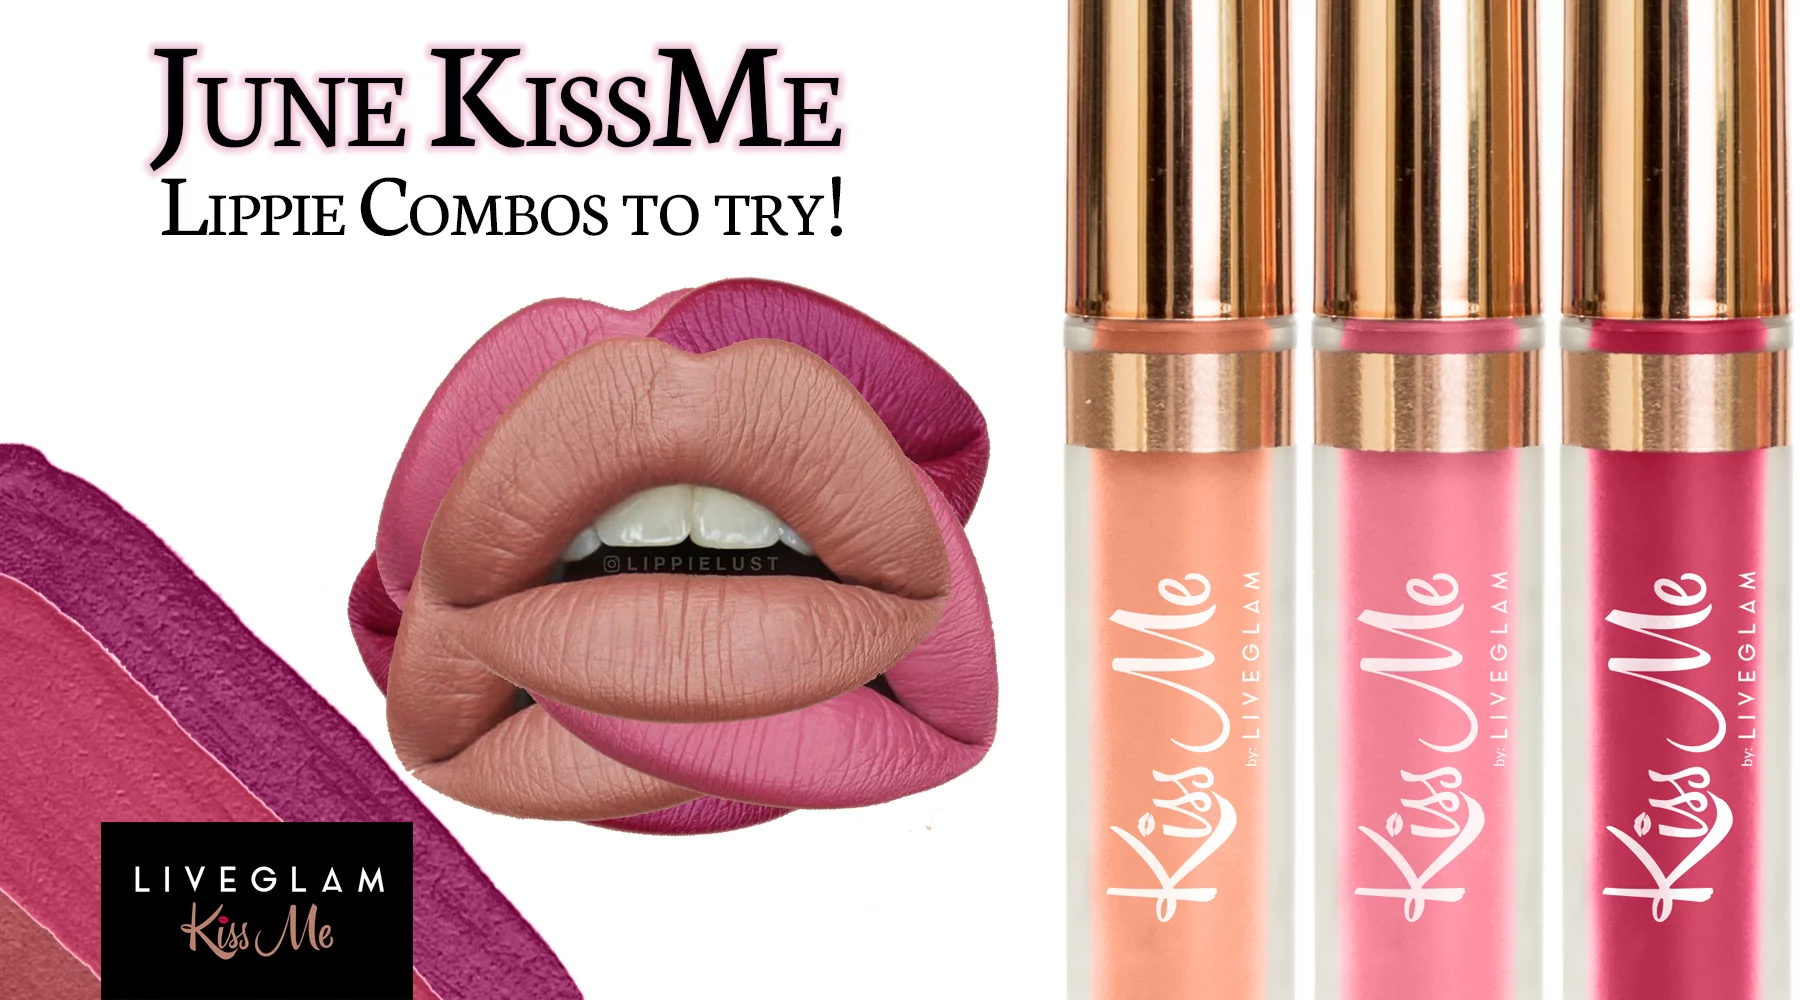 June KissMe Color Combos to Try!